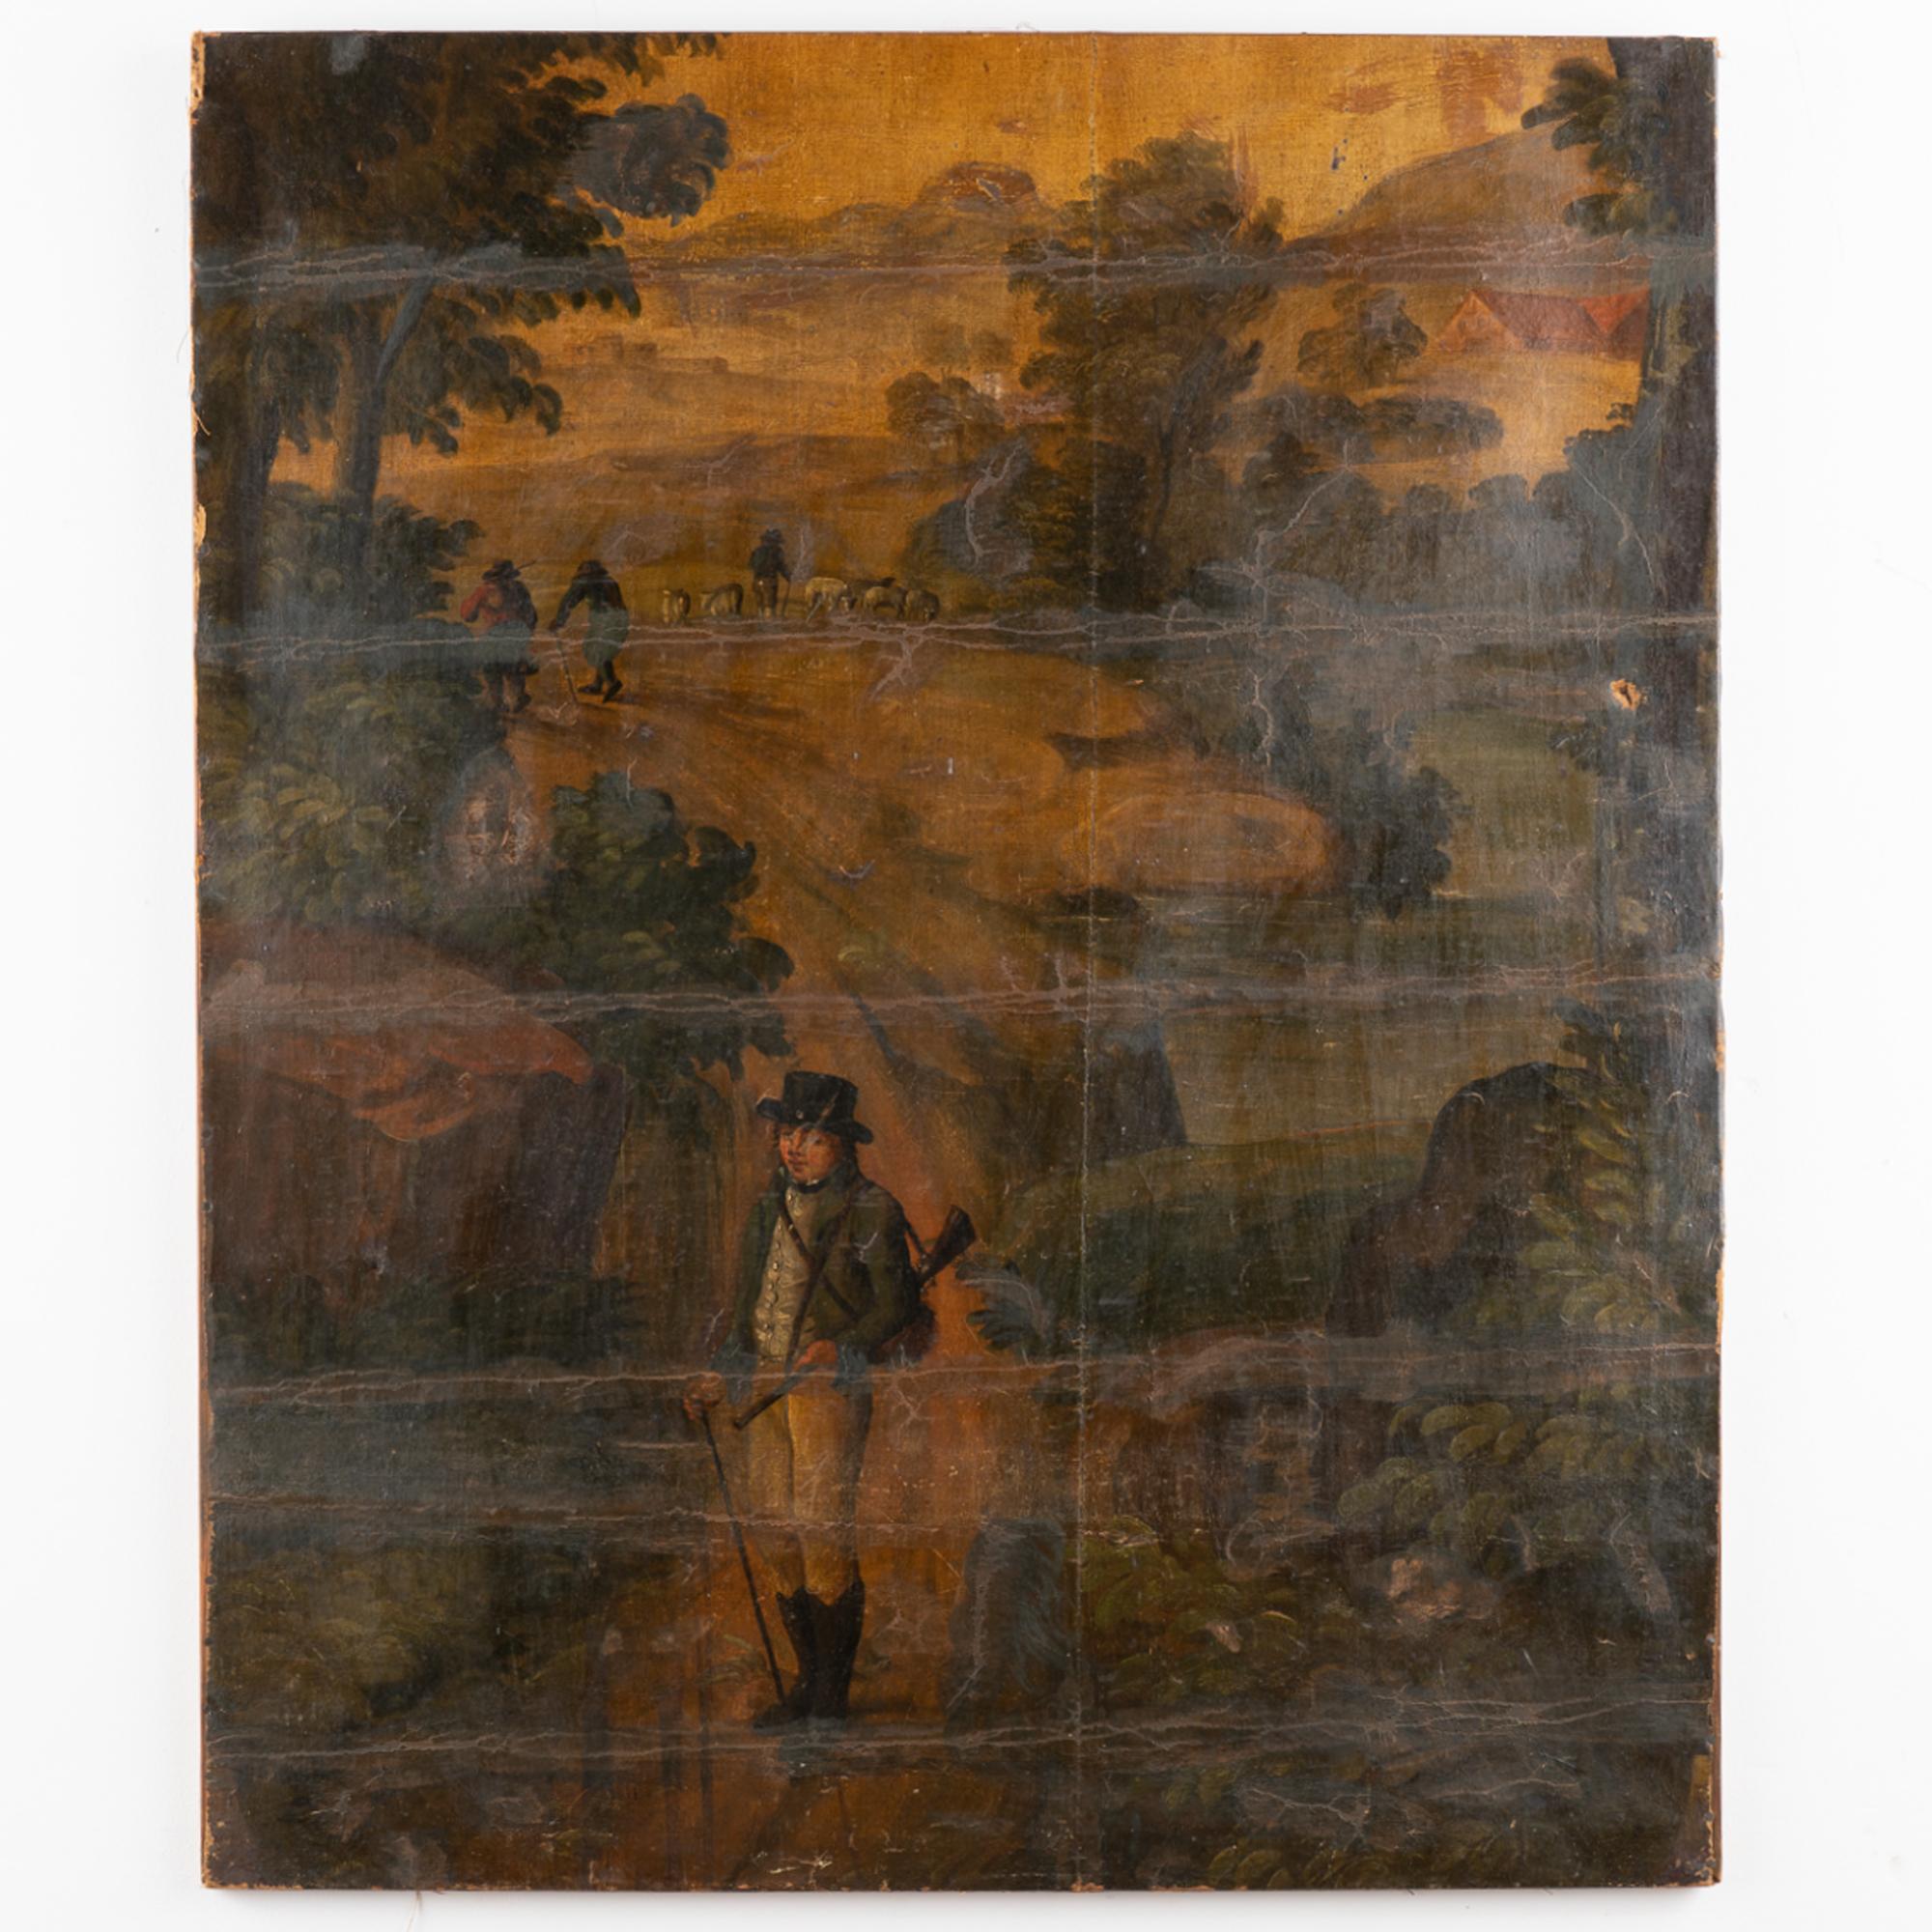 This original oil on canvas landscape painting has a primitive appeal. Note the figures including hunter with gun in foreground and shepherd with sheep in background.
Unknown artist. No frame.
Condition: has folds in canvas, holes, cracquelure and